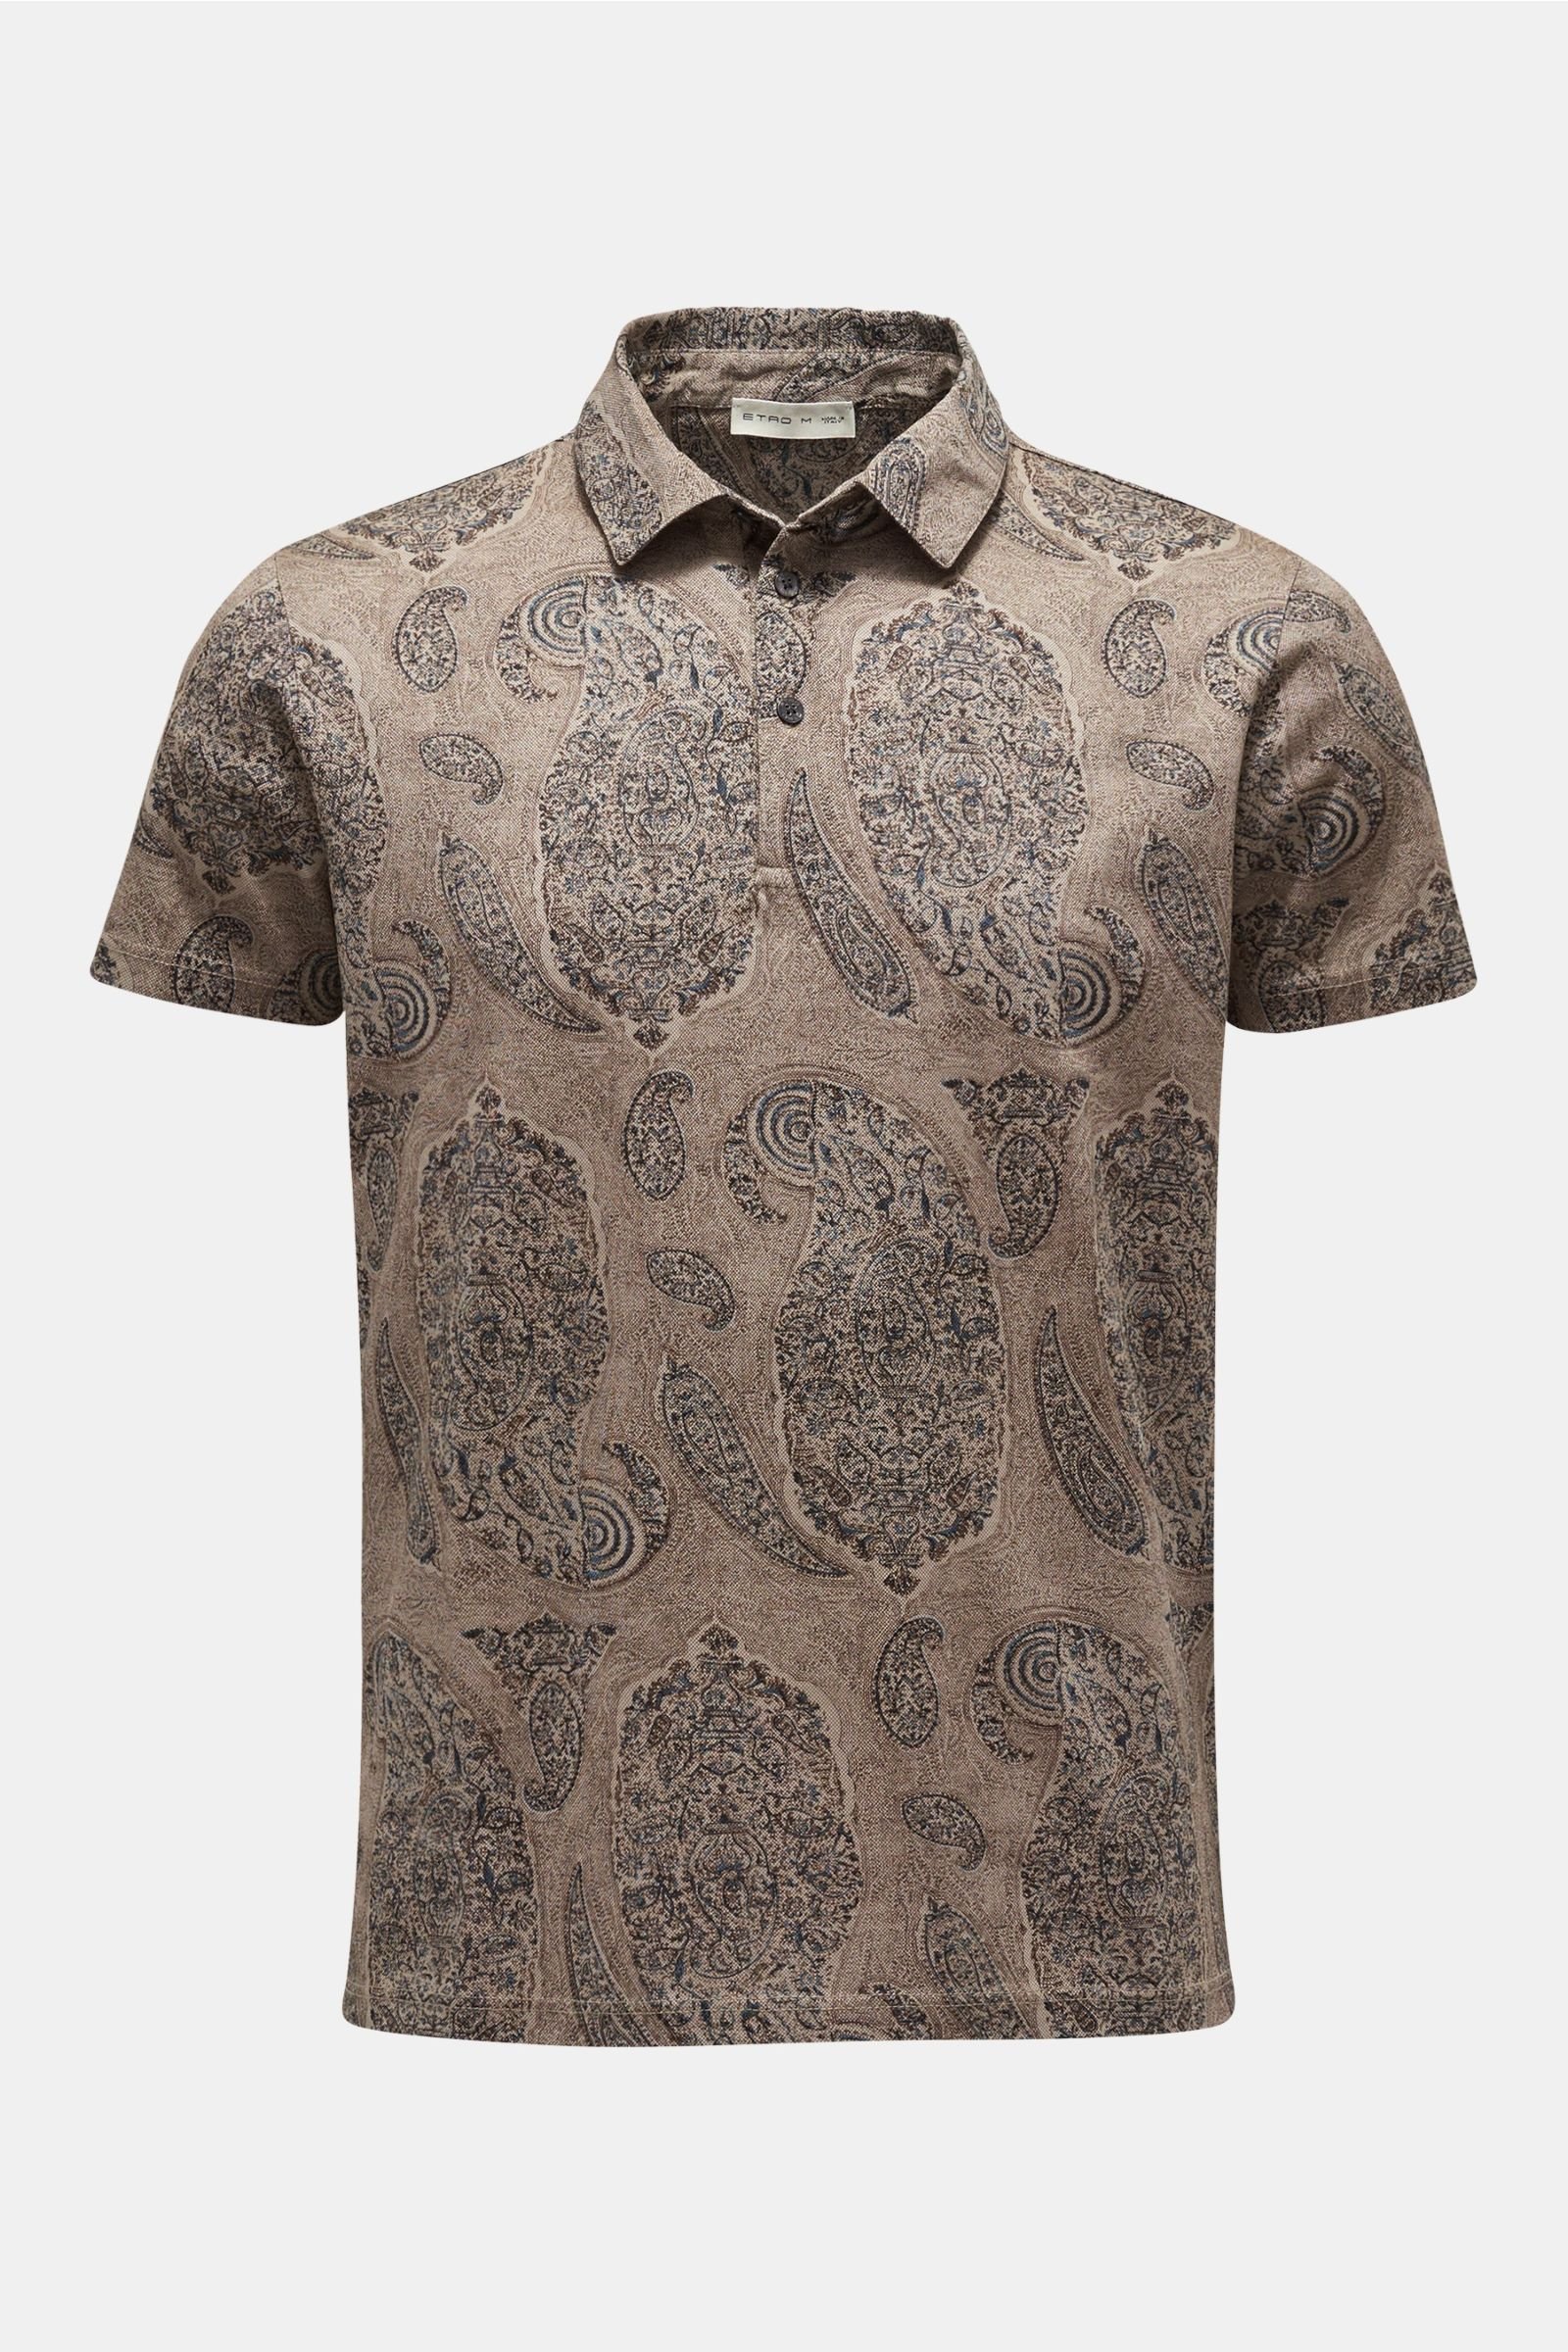 Polo shirt beige patterned